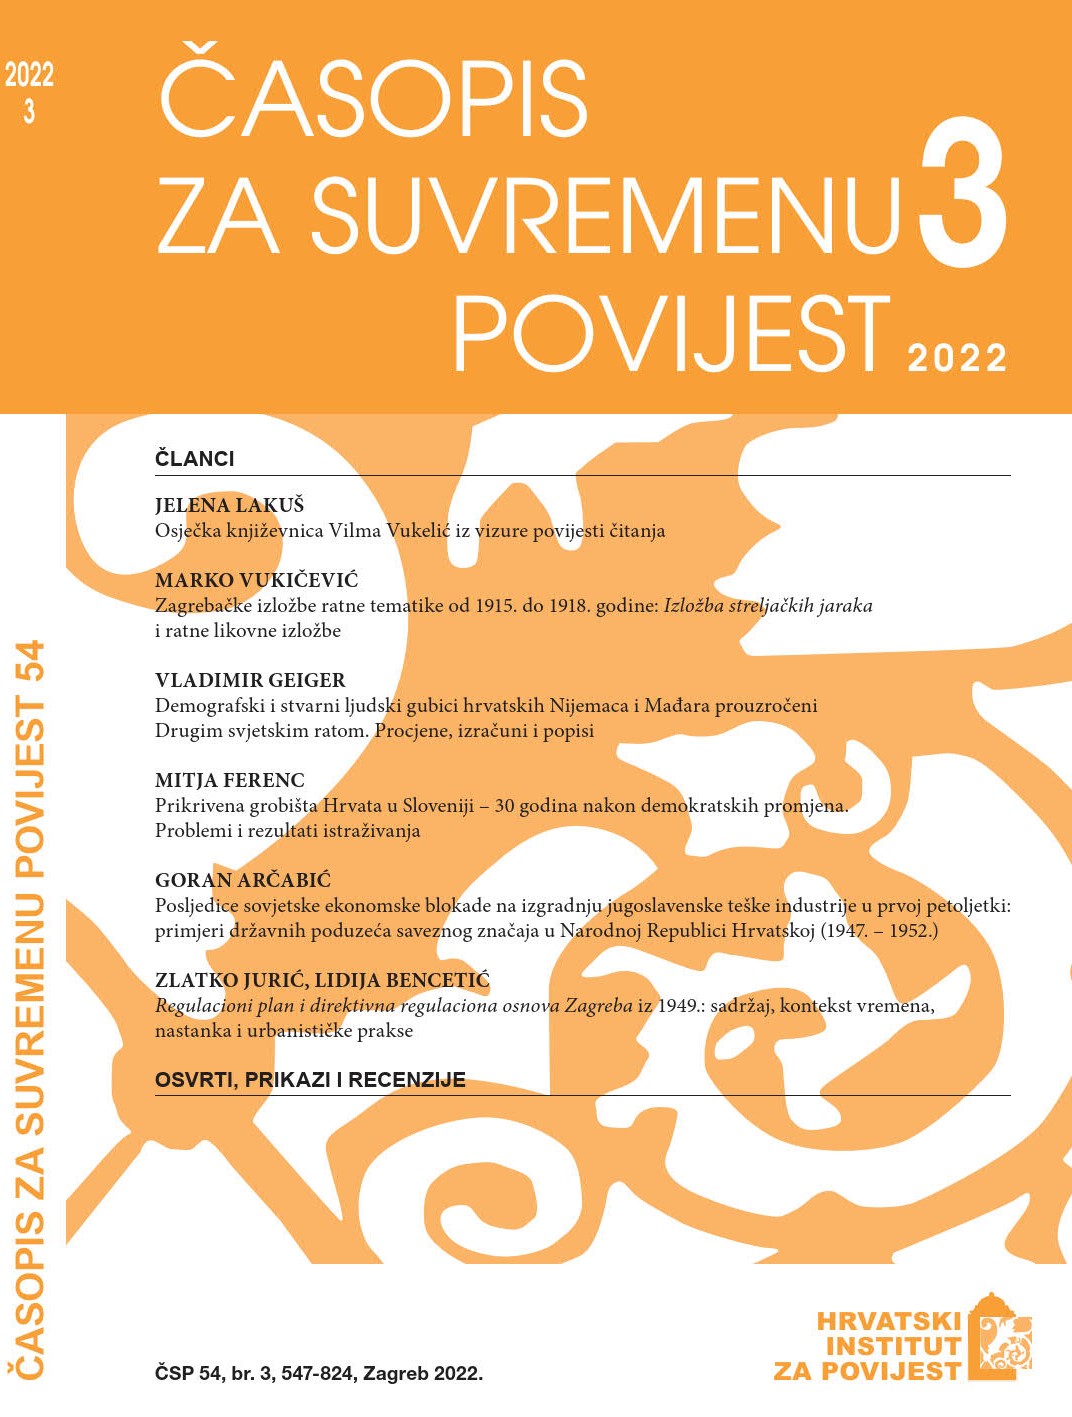 Concealed Mass Graves of Croats in Slovenia: 30 Years after the Democratic Changes. Problems and Research Results Cover Image